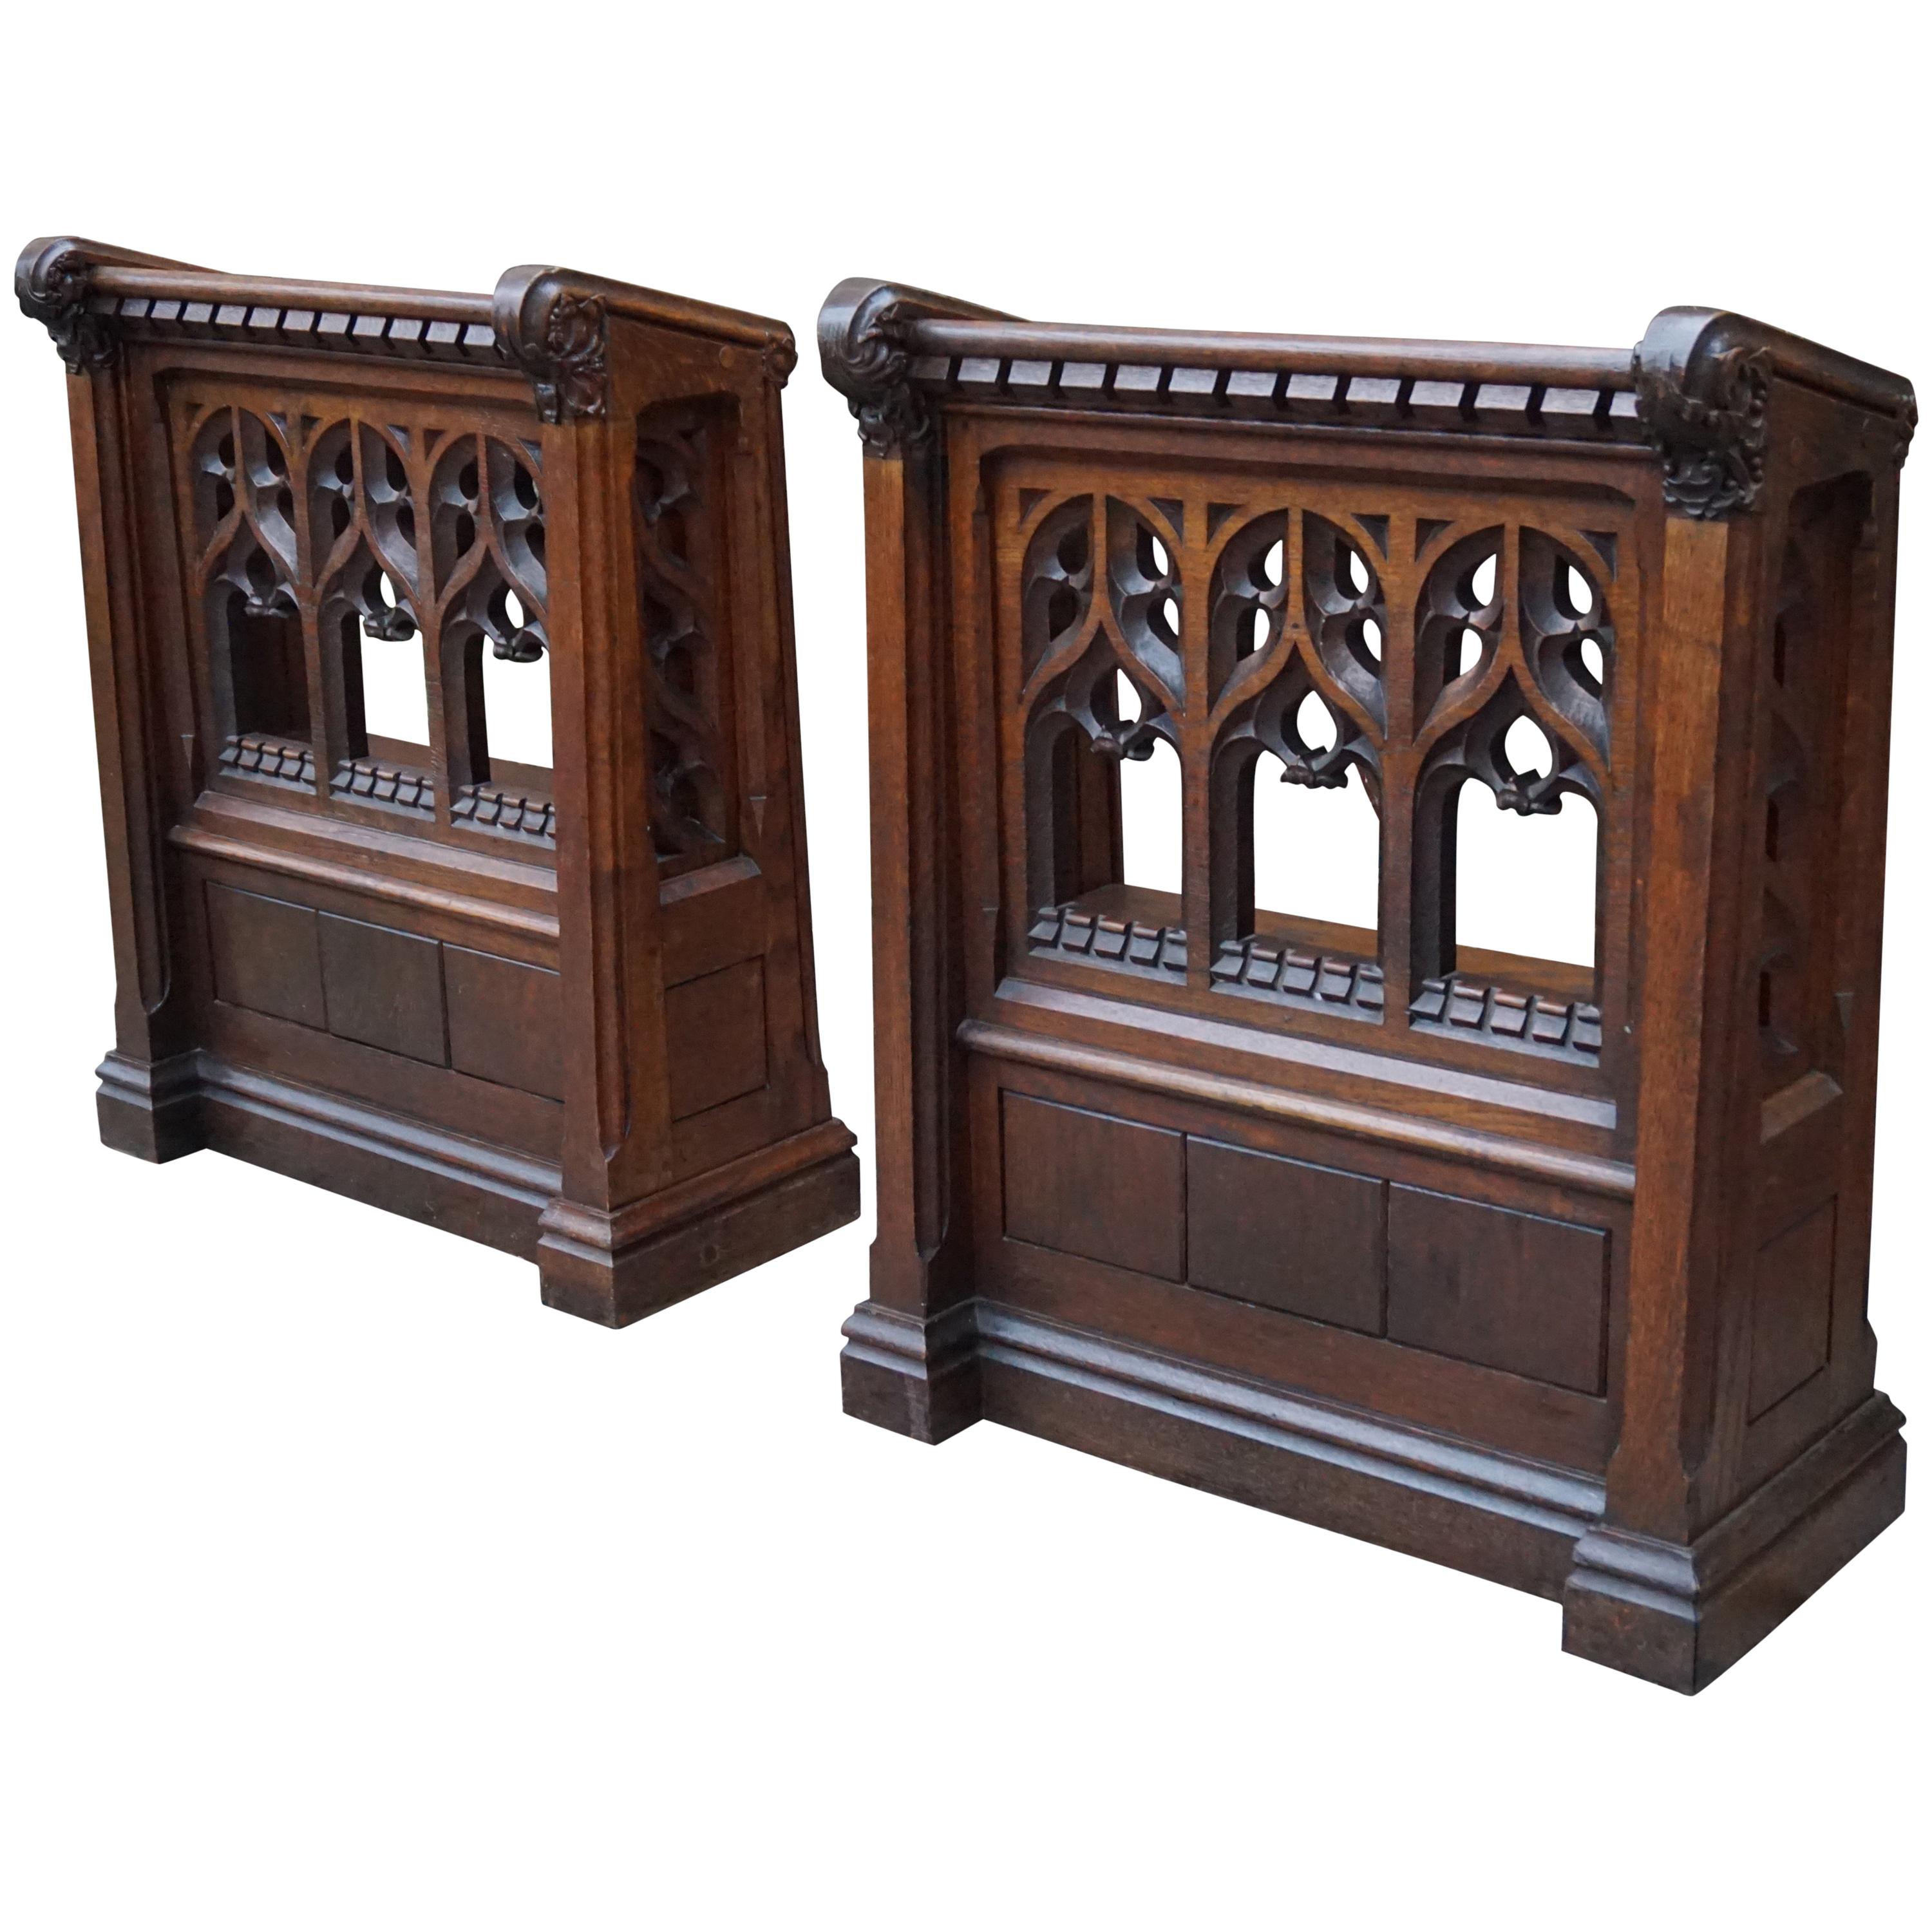 Pair of Hand Carved Gothic Revival Oak Church Lectern Desks with Bookshelf